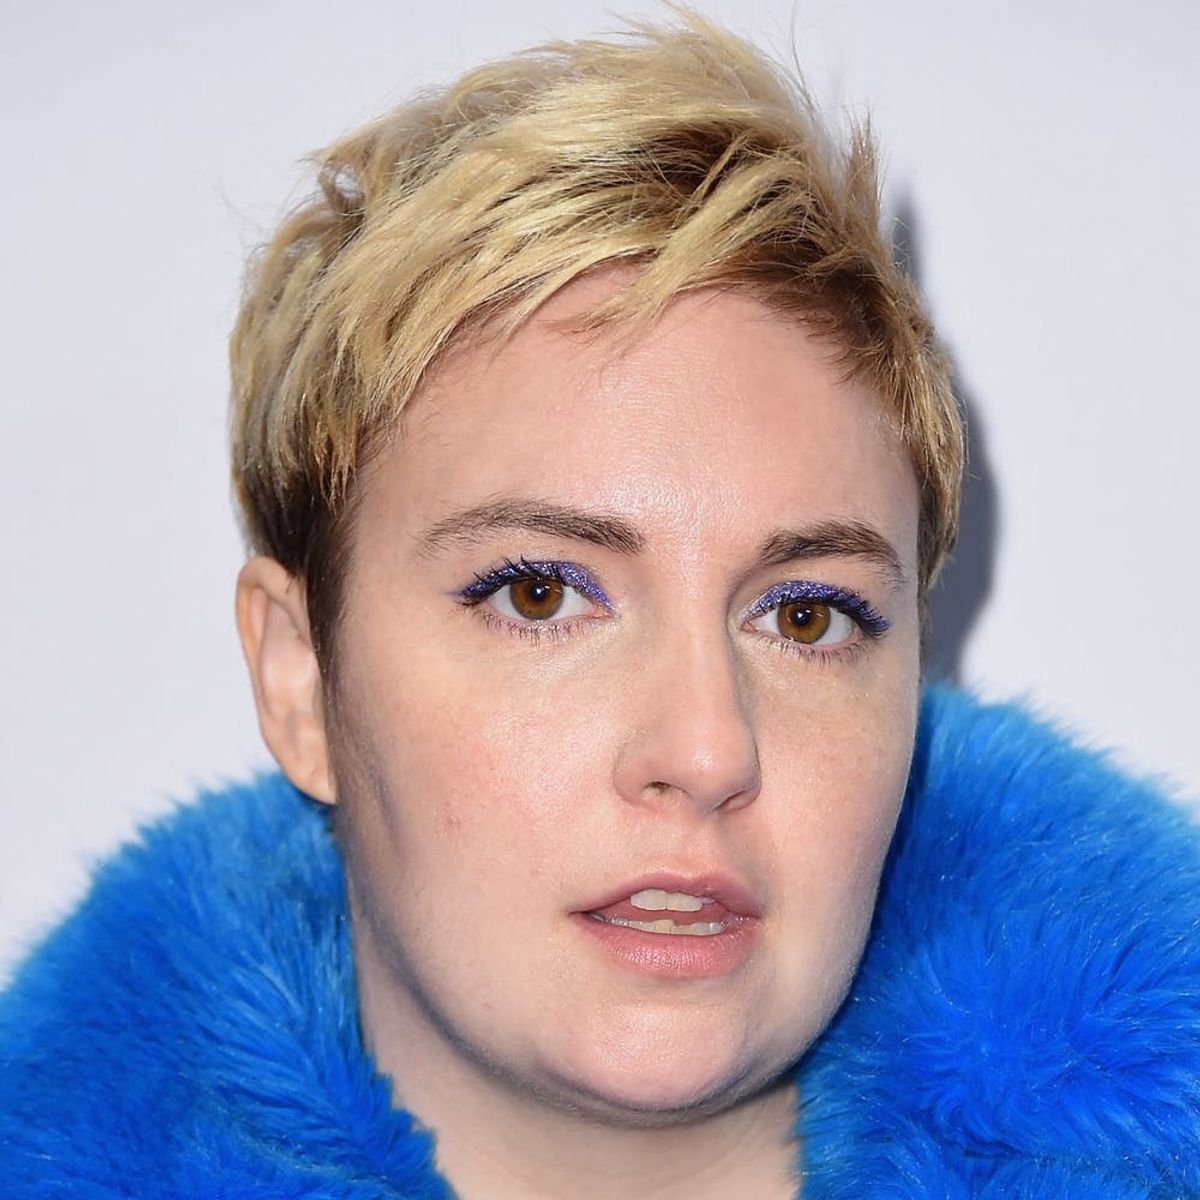 Lena Dunham Has Apologized for Her Support of a “Girls” Writer Accused of Sexual Assault